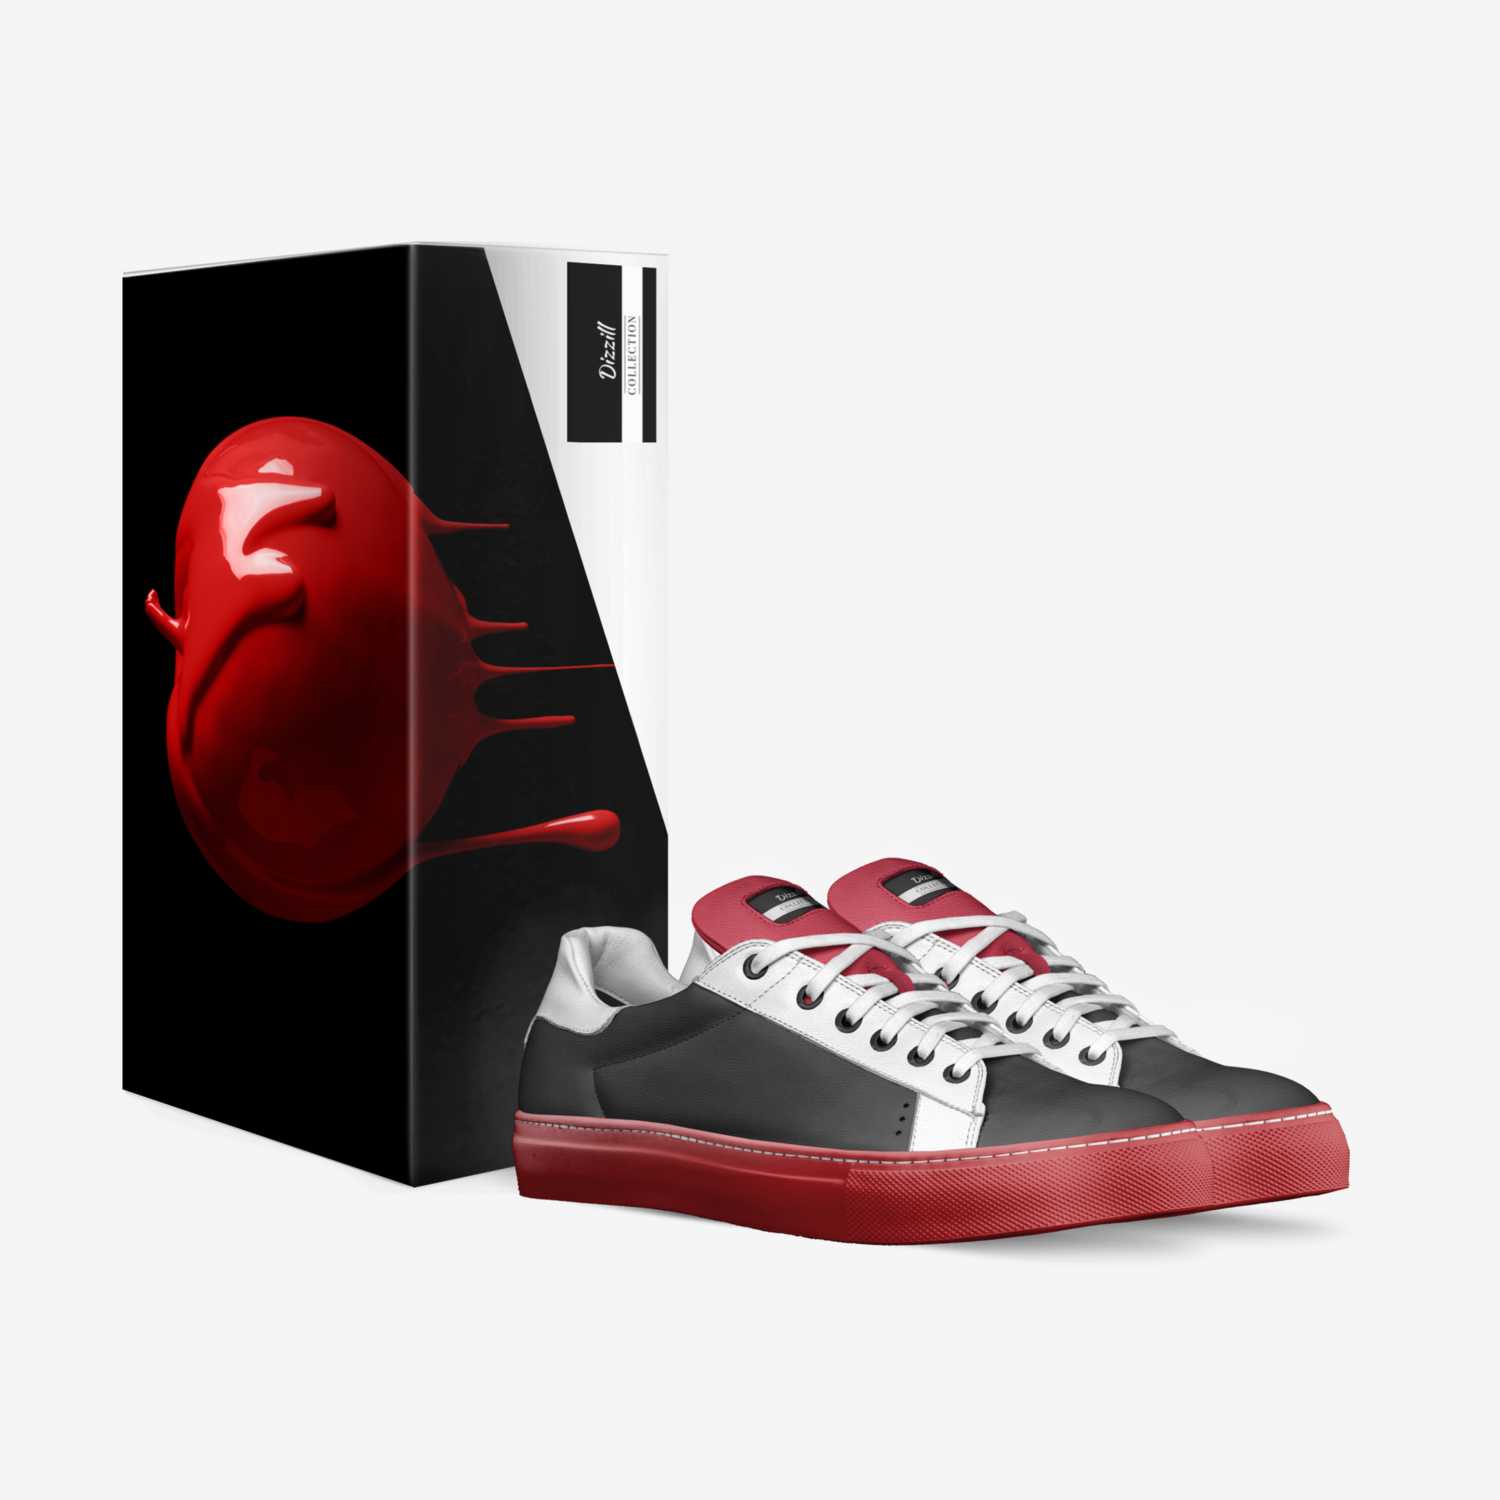 Dizzill custom made in Italy shoes by Zach Lundy | Box view